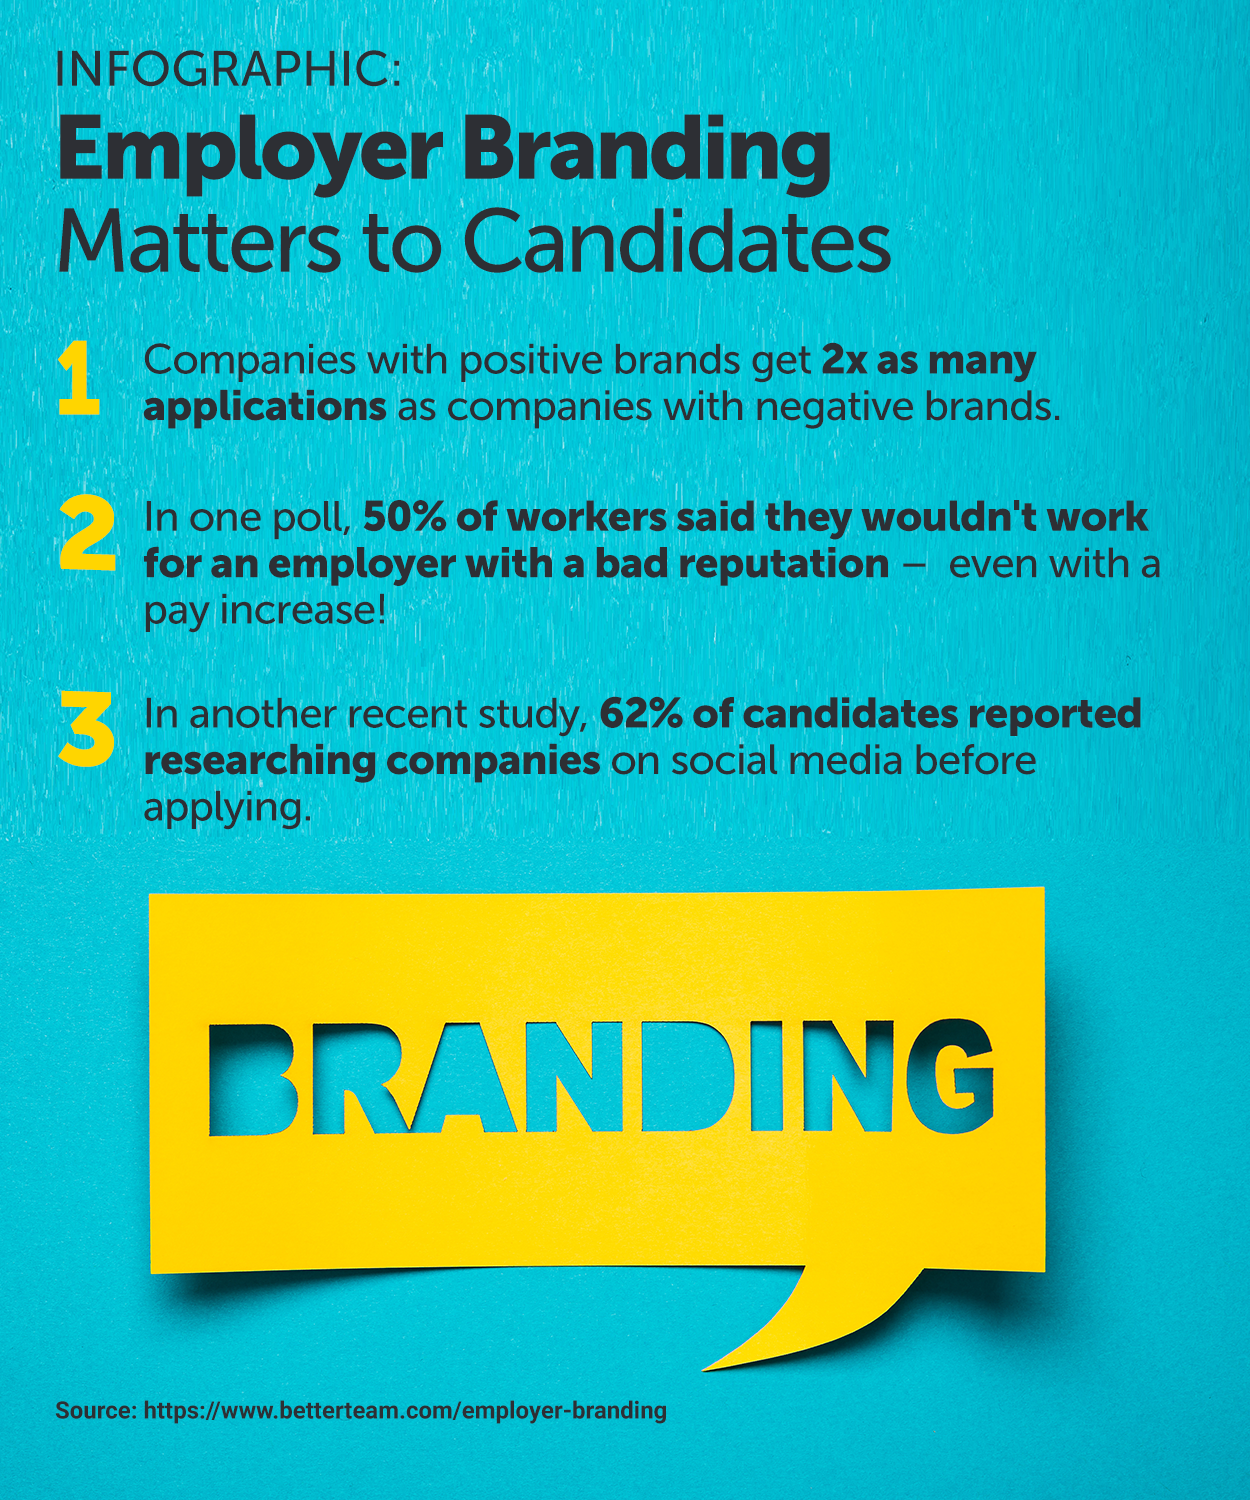 Infographic: Employer Branding Matters to Candidates